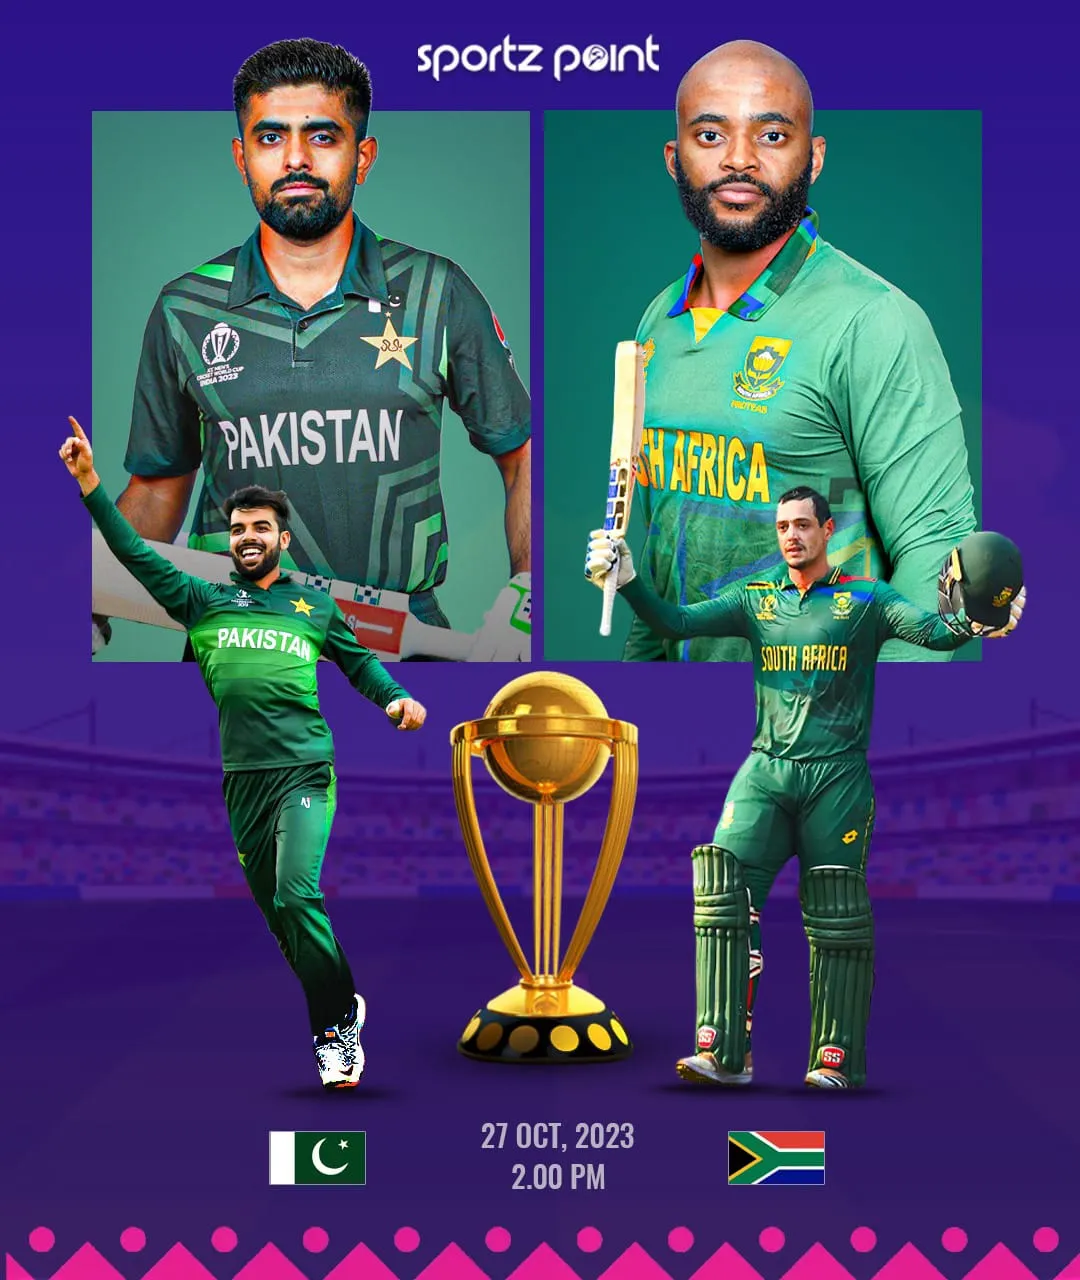 Pakistan and South Africa will face each other in the 26th ICC Cricket World Cup 2023 match  Sportz Point